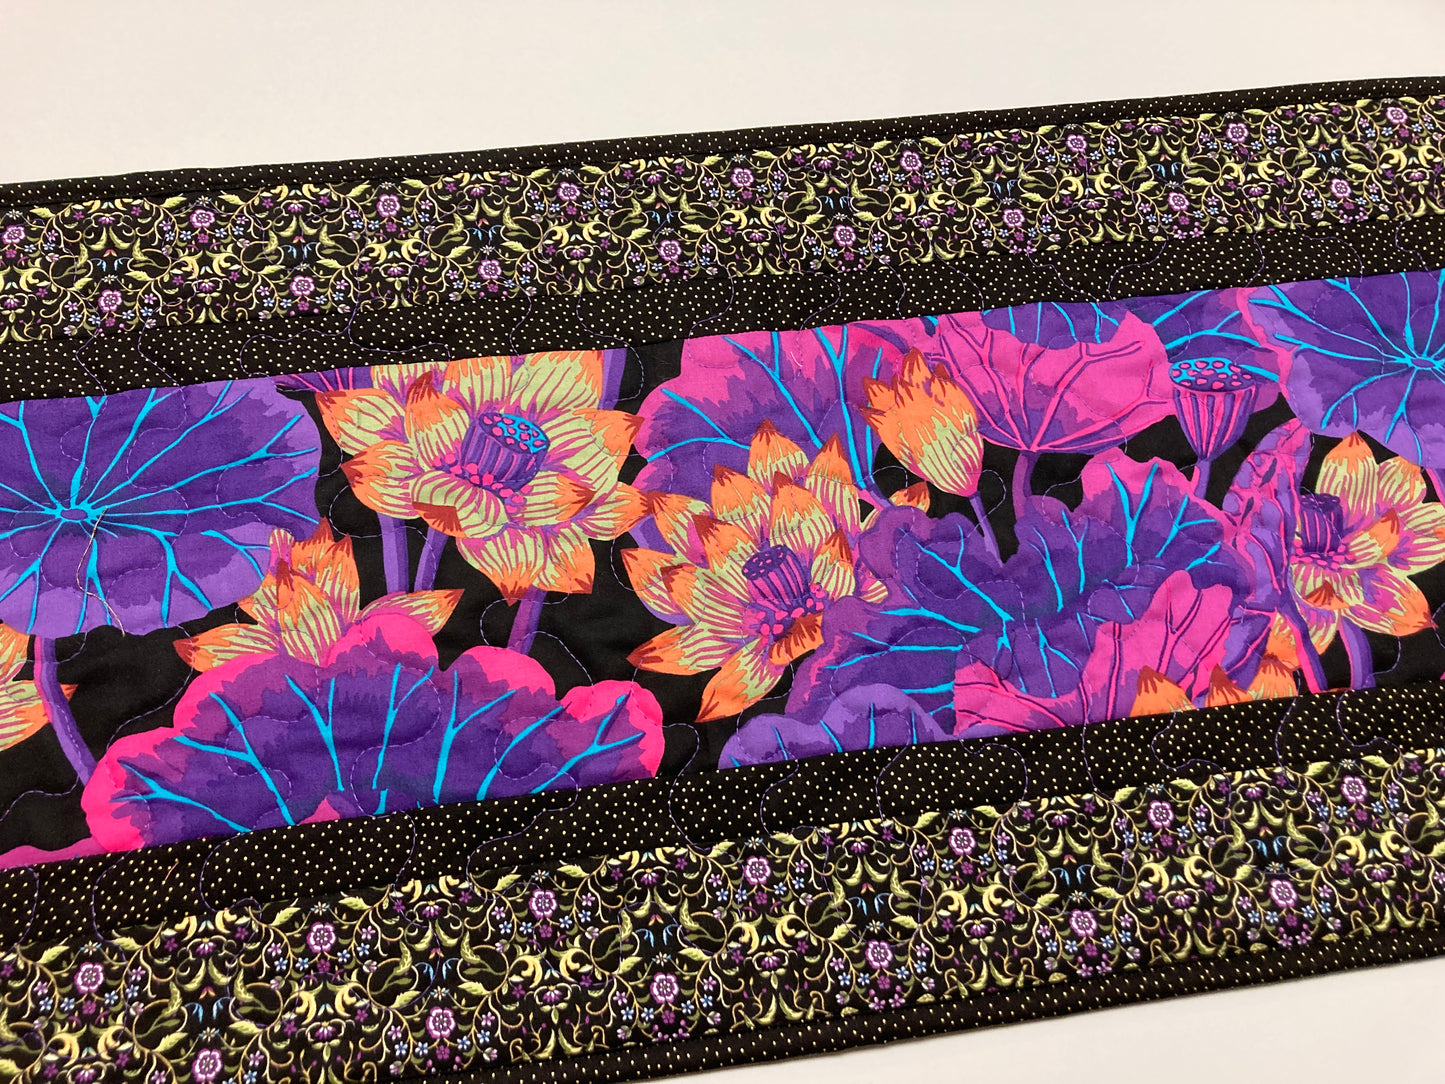 Quilted Table Runner Kaffe Fassett Purple Pink and Black Flowers Summer Decor, Reversible, 14x48" Dining Coffee Table Runner, Bright Bold